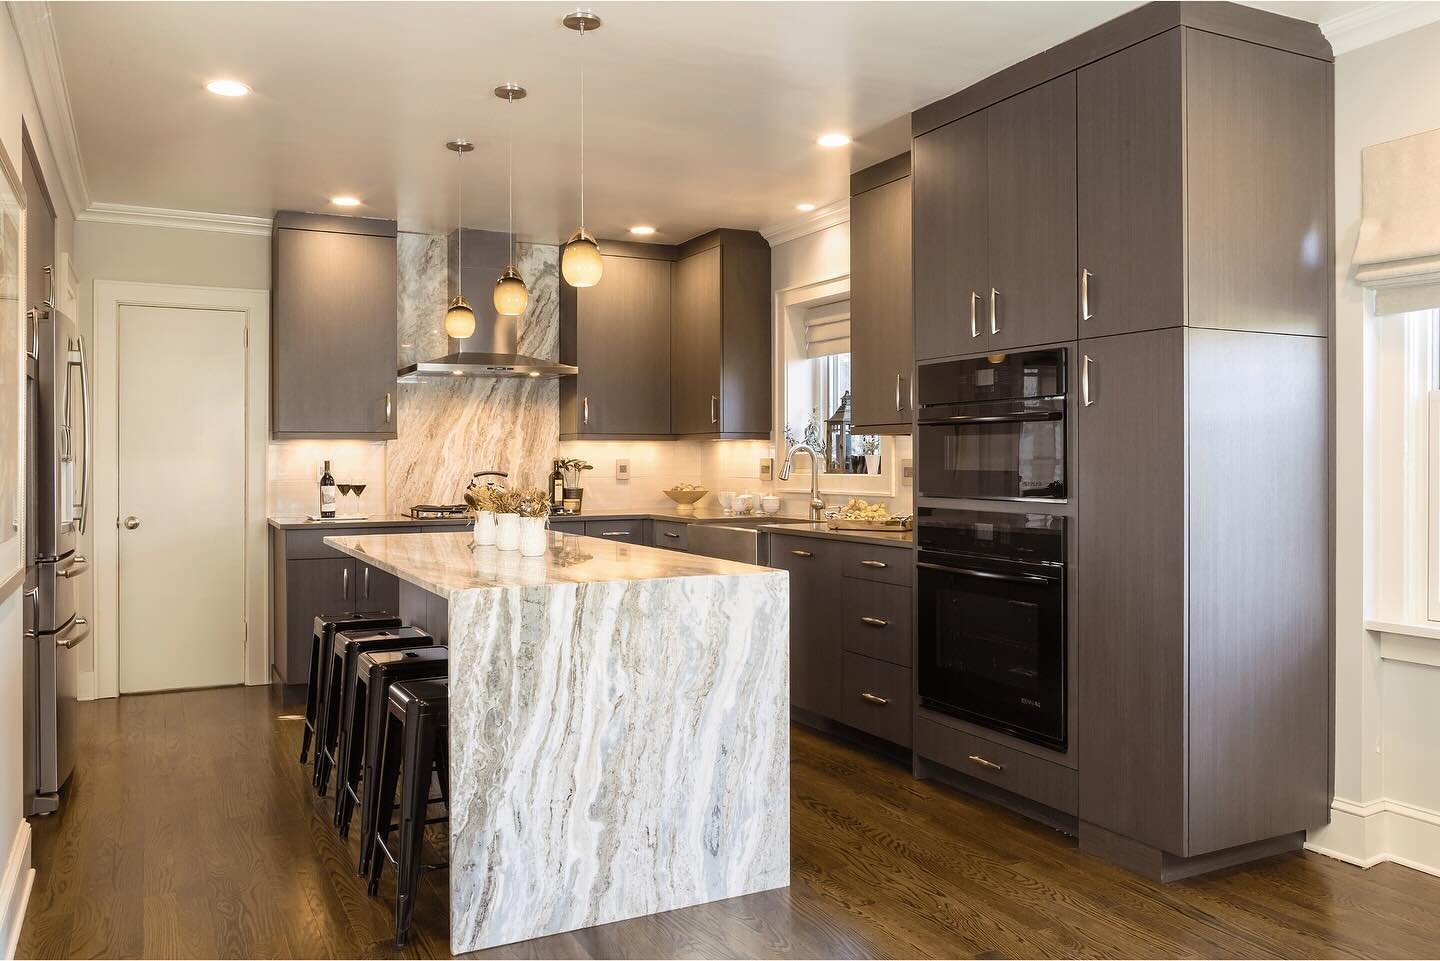 With rich nodes of brown, this kitchen is the perfect place to cozy up with your morning coffee. ☕️

Kitchen Designer, John Starck
Contractor, Cedar Construction
Photos, Creepwalk Media

#ShowcaseKitchens #Longislandkitchens #manhasset #kitcheninspo 